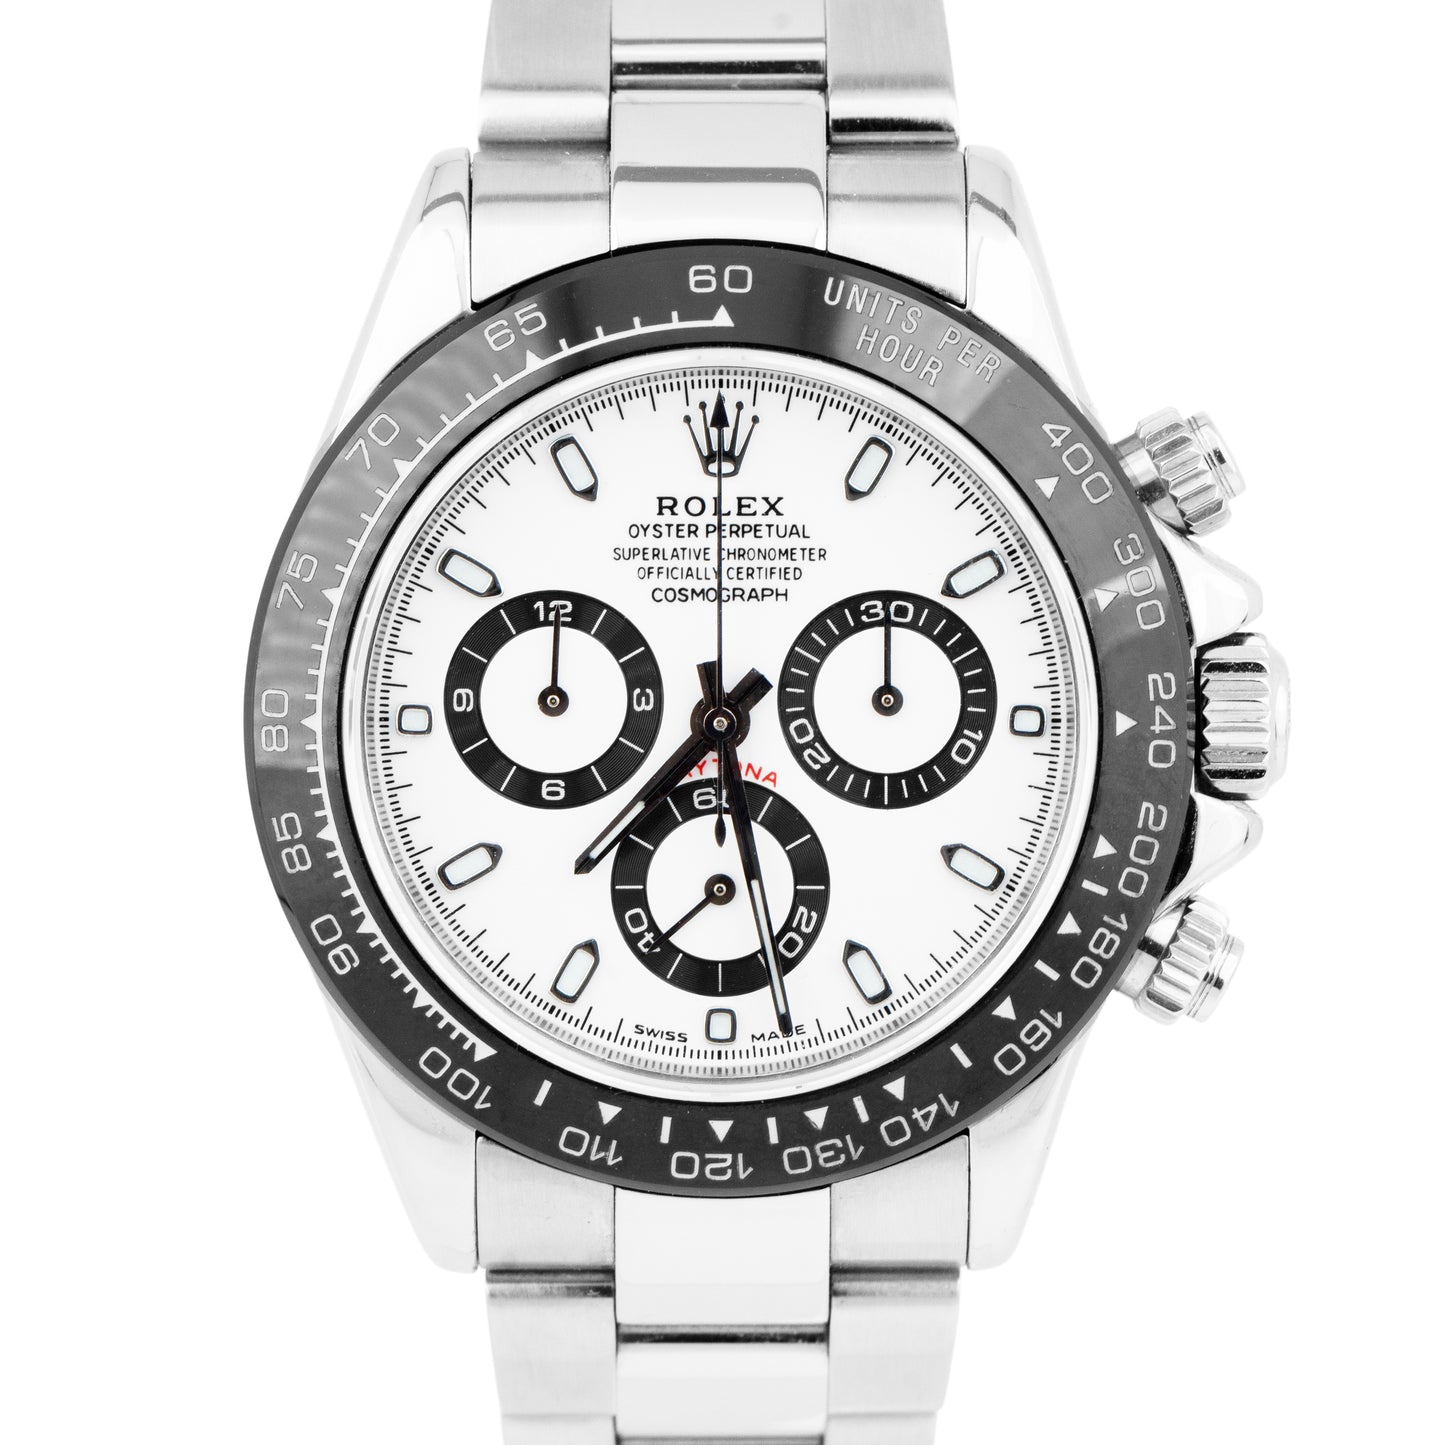 Rolex Daytona Cosmograph 116520 White Stainless Steel Ceramic Oyster 40mm Watch